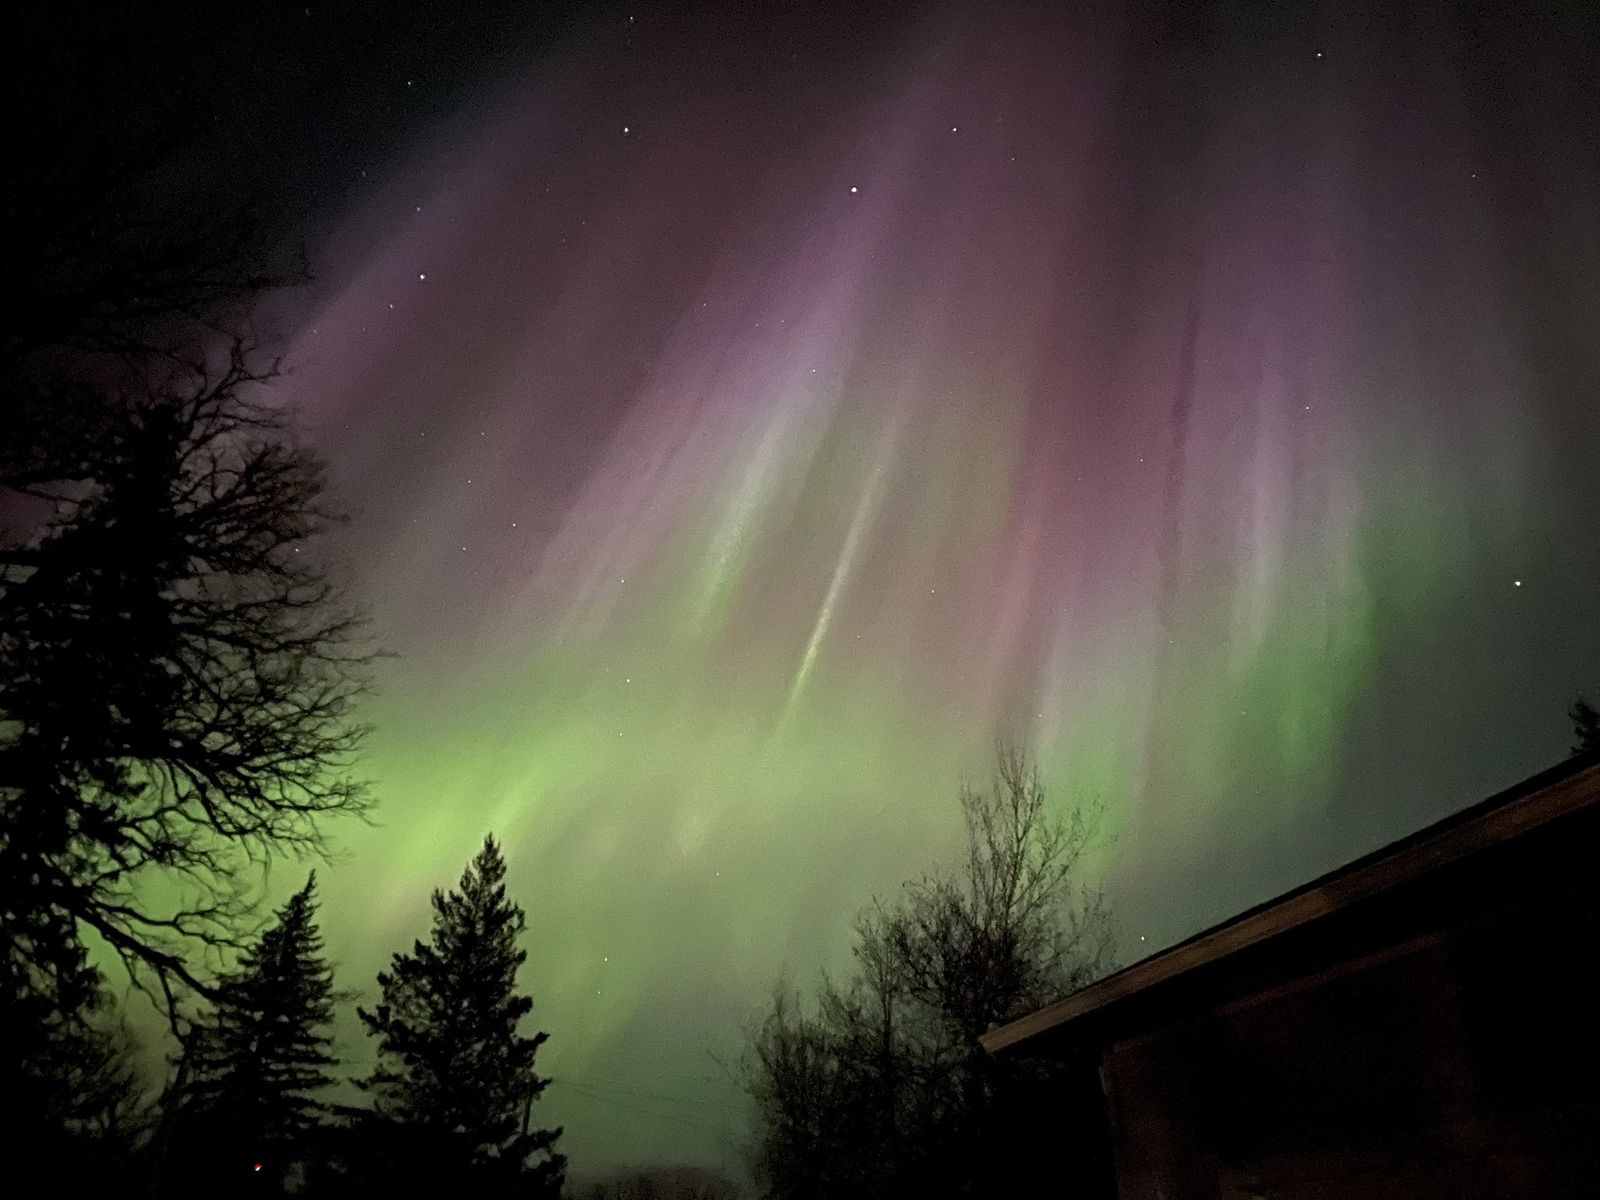 Severe solar storm creates dazzling auroras farther south - The